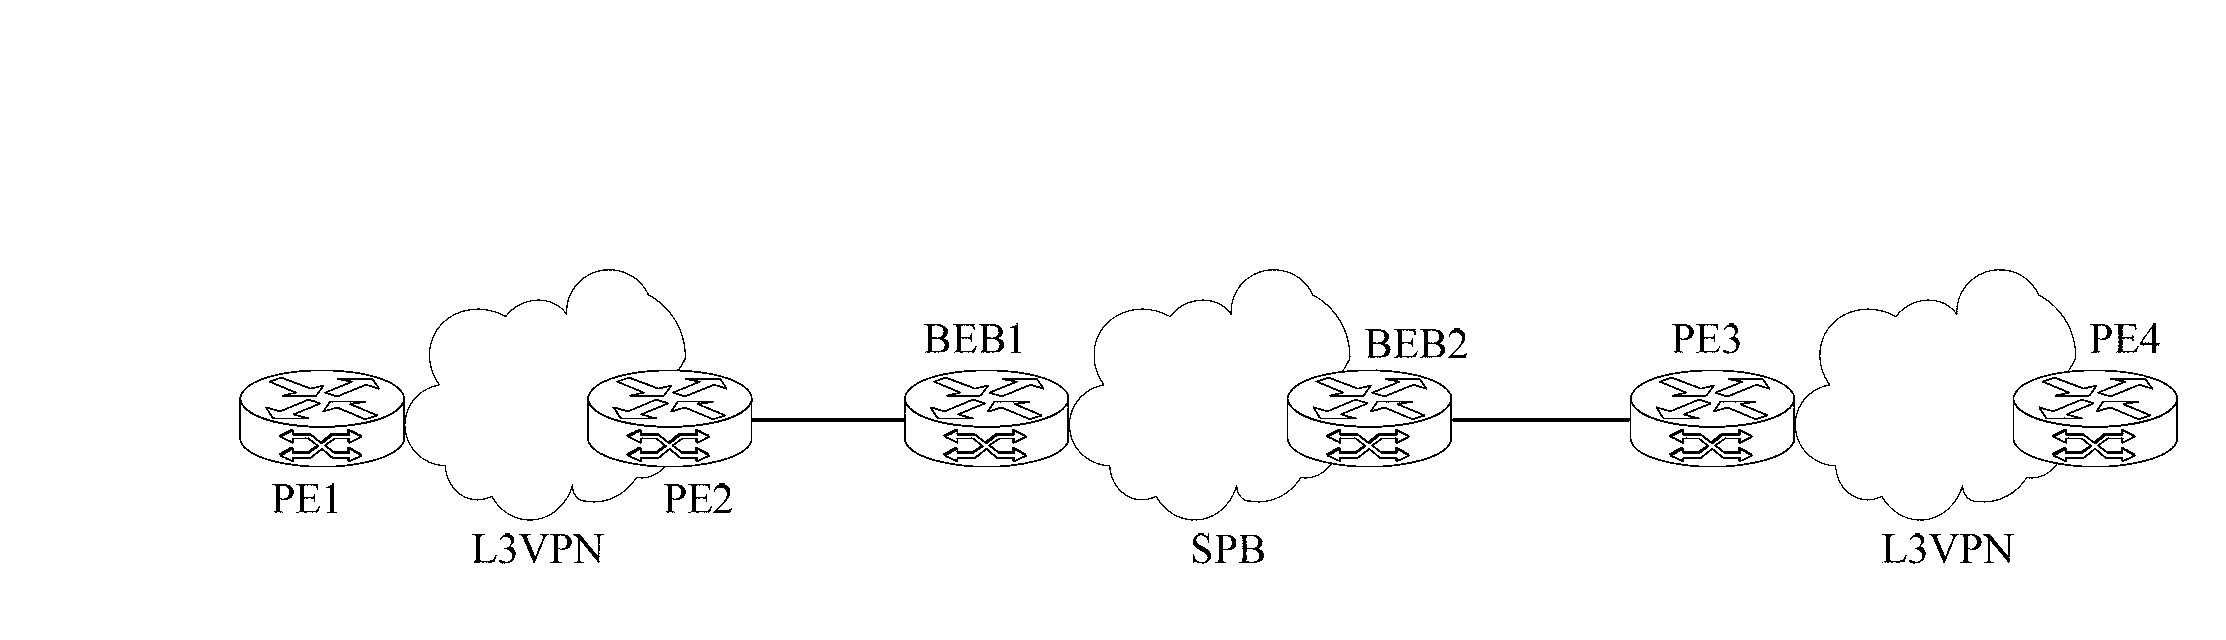 Intercommunication method of shortest path bridging network and Layer 3 virtual private network and common edge equipment